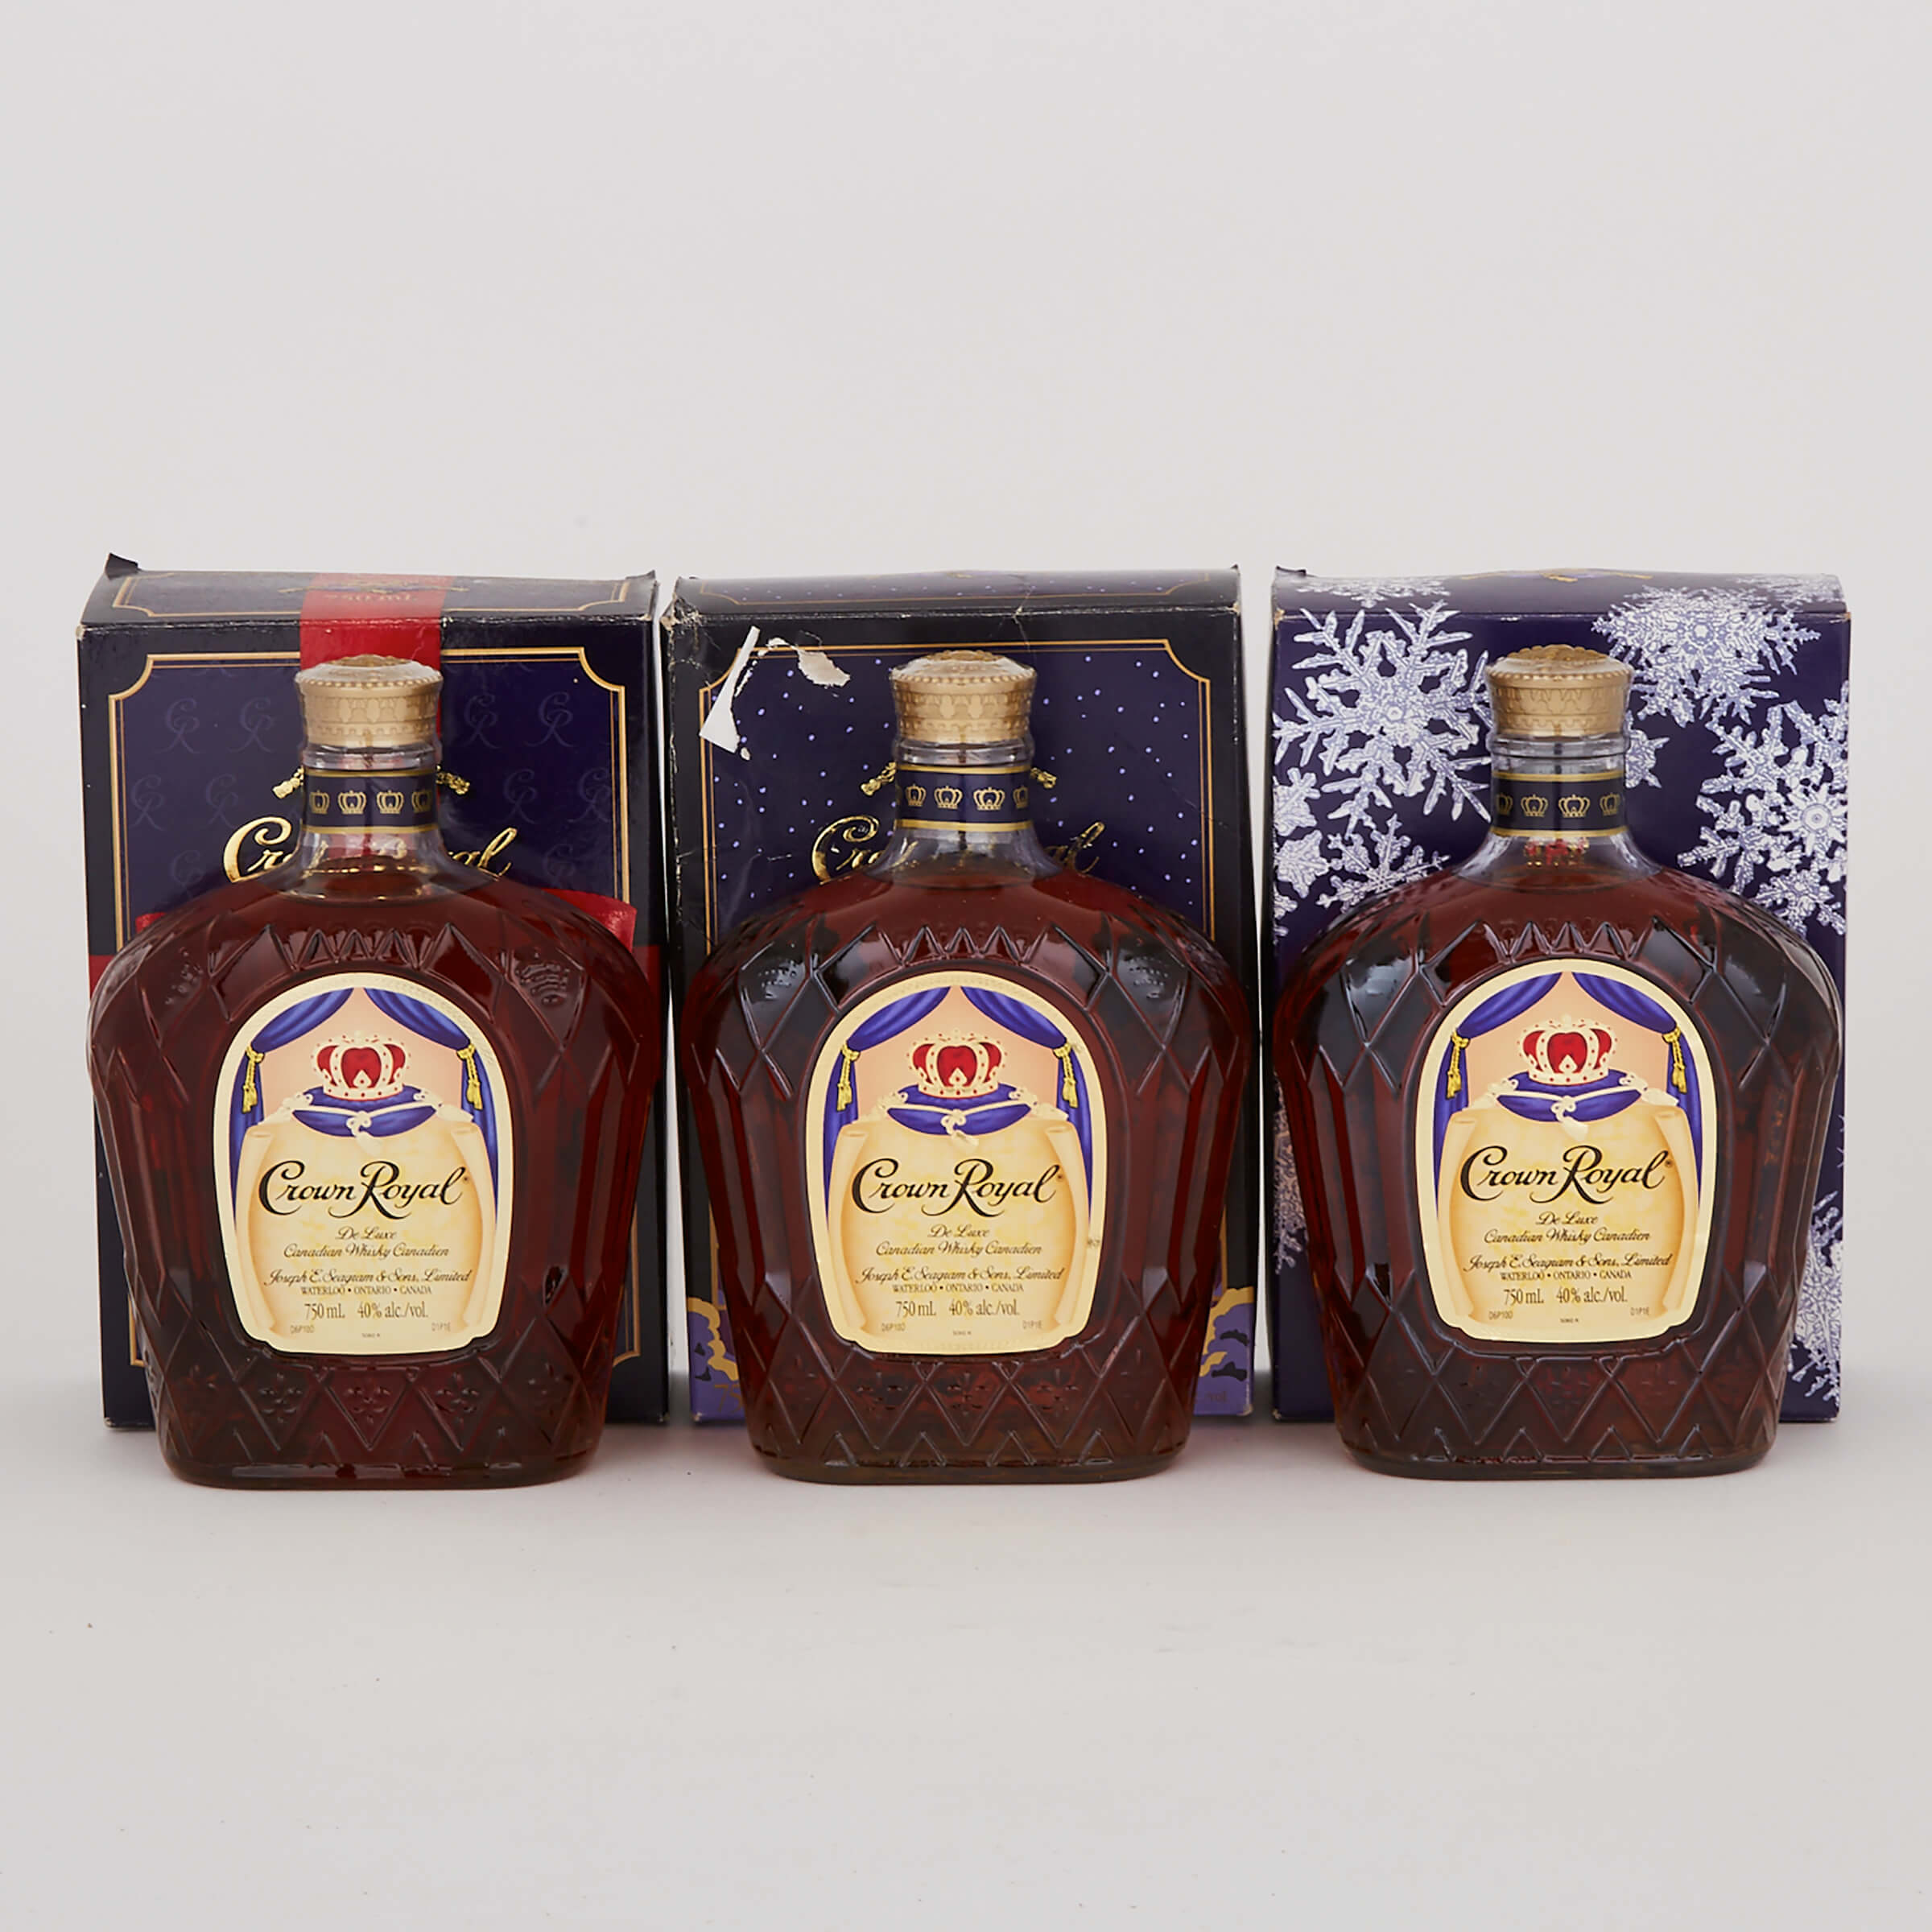 CROWN ROYAL DELUXE CANADIAN WHISKEY (NAS) (ONE 750 ML)
CROWN ROYAL DELUXE CANADIAN WHISKEY (NAS) (ONE 750 ML)
CROWN ROYAL DELUXE CANADIAN WHISKEY (NAS) (ONE 750 ML)